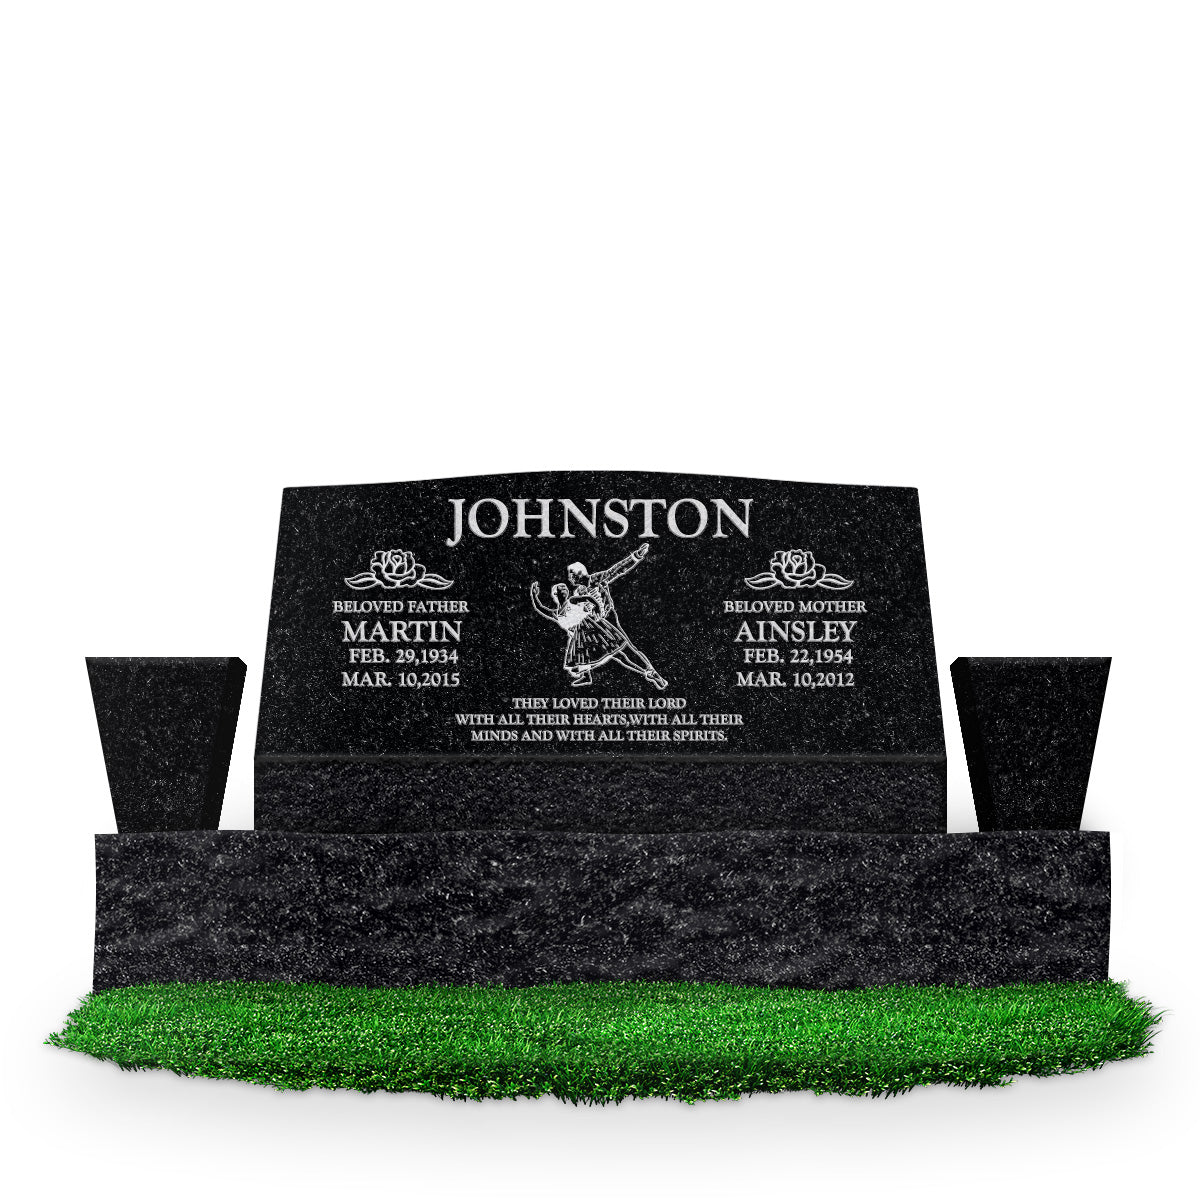 36″ x 10″ x 16″ Serp Top Slant Headstone: polished front and back; 52″ base; two square tapered vases; Companion/Artwork